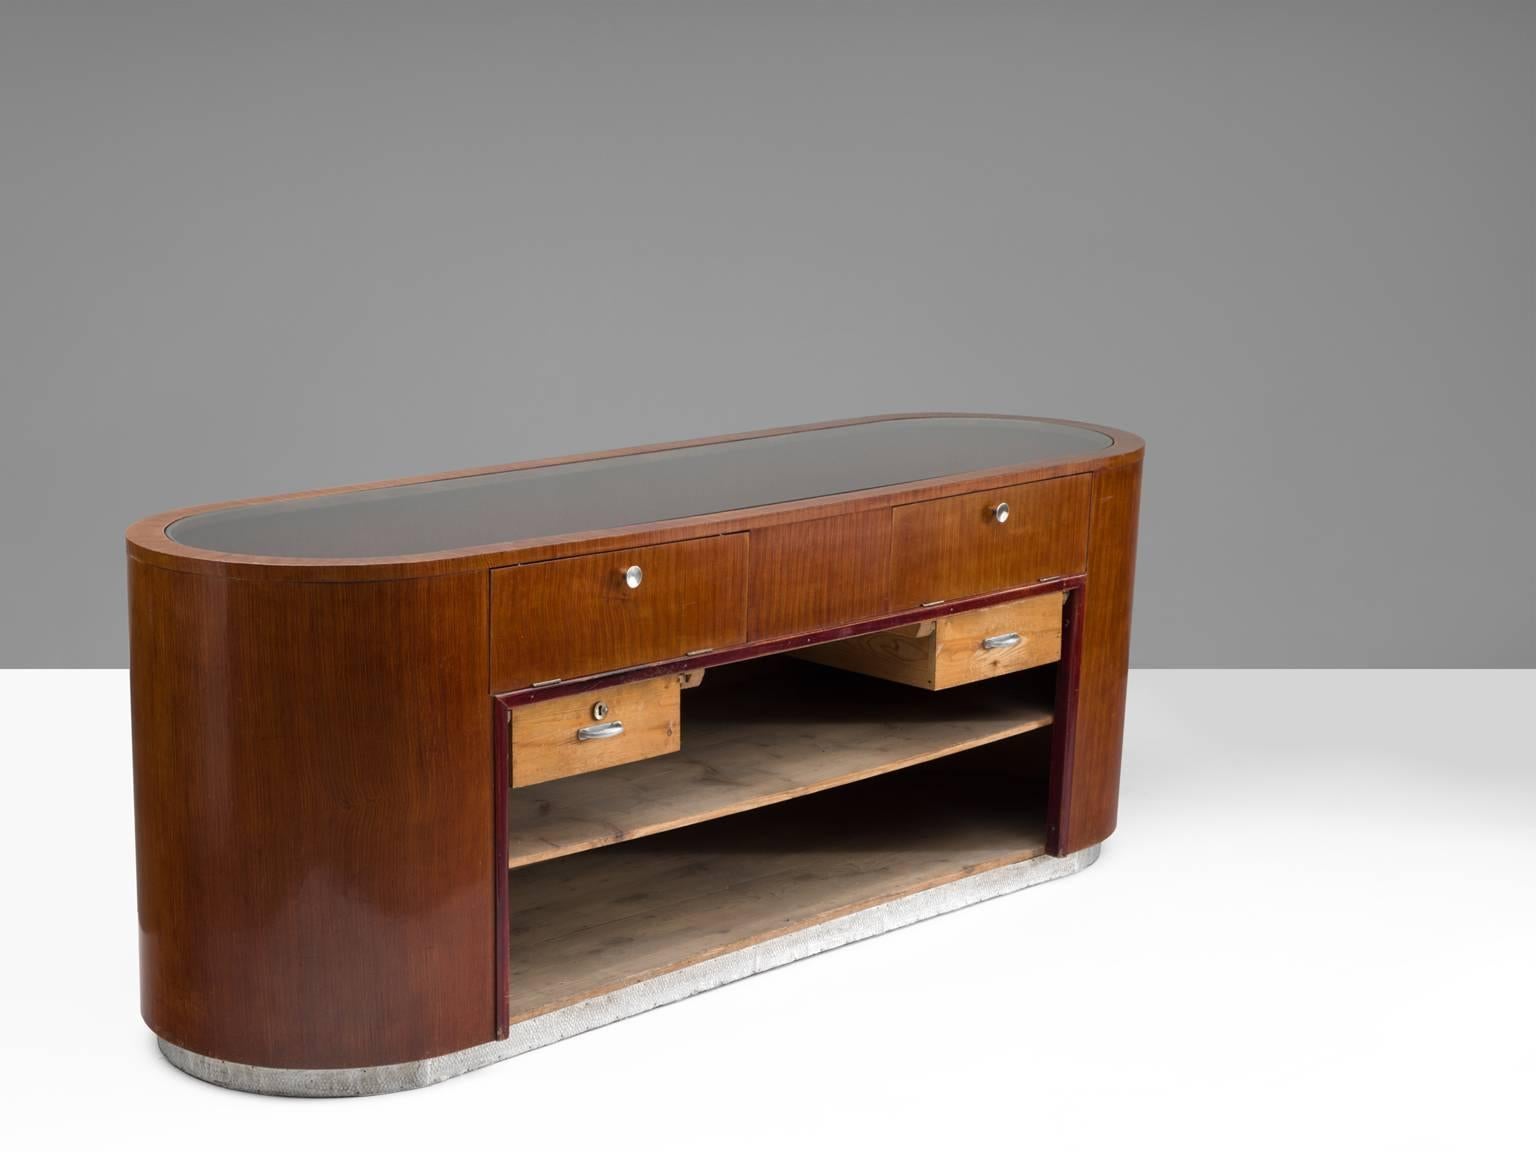 Sideboard in teak and glass, Denmark, 1950s.

This organic shaped counter is versatile. It can be used as a dry bar, as a cabinet, counter or credenza. Wonderful warm grains of the mahogany and slick chrome handles form a wonderful contrast. 